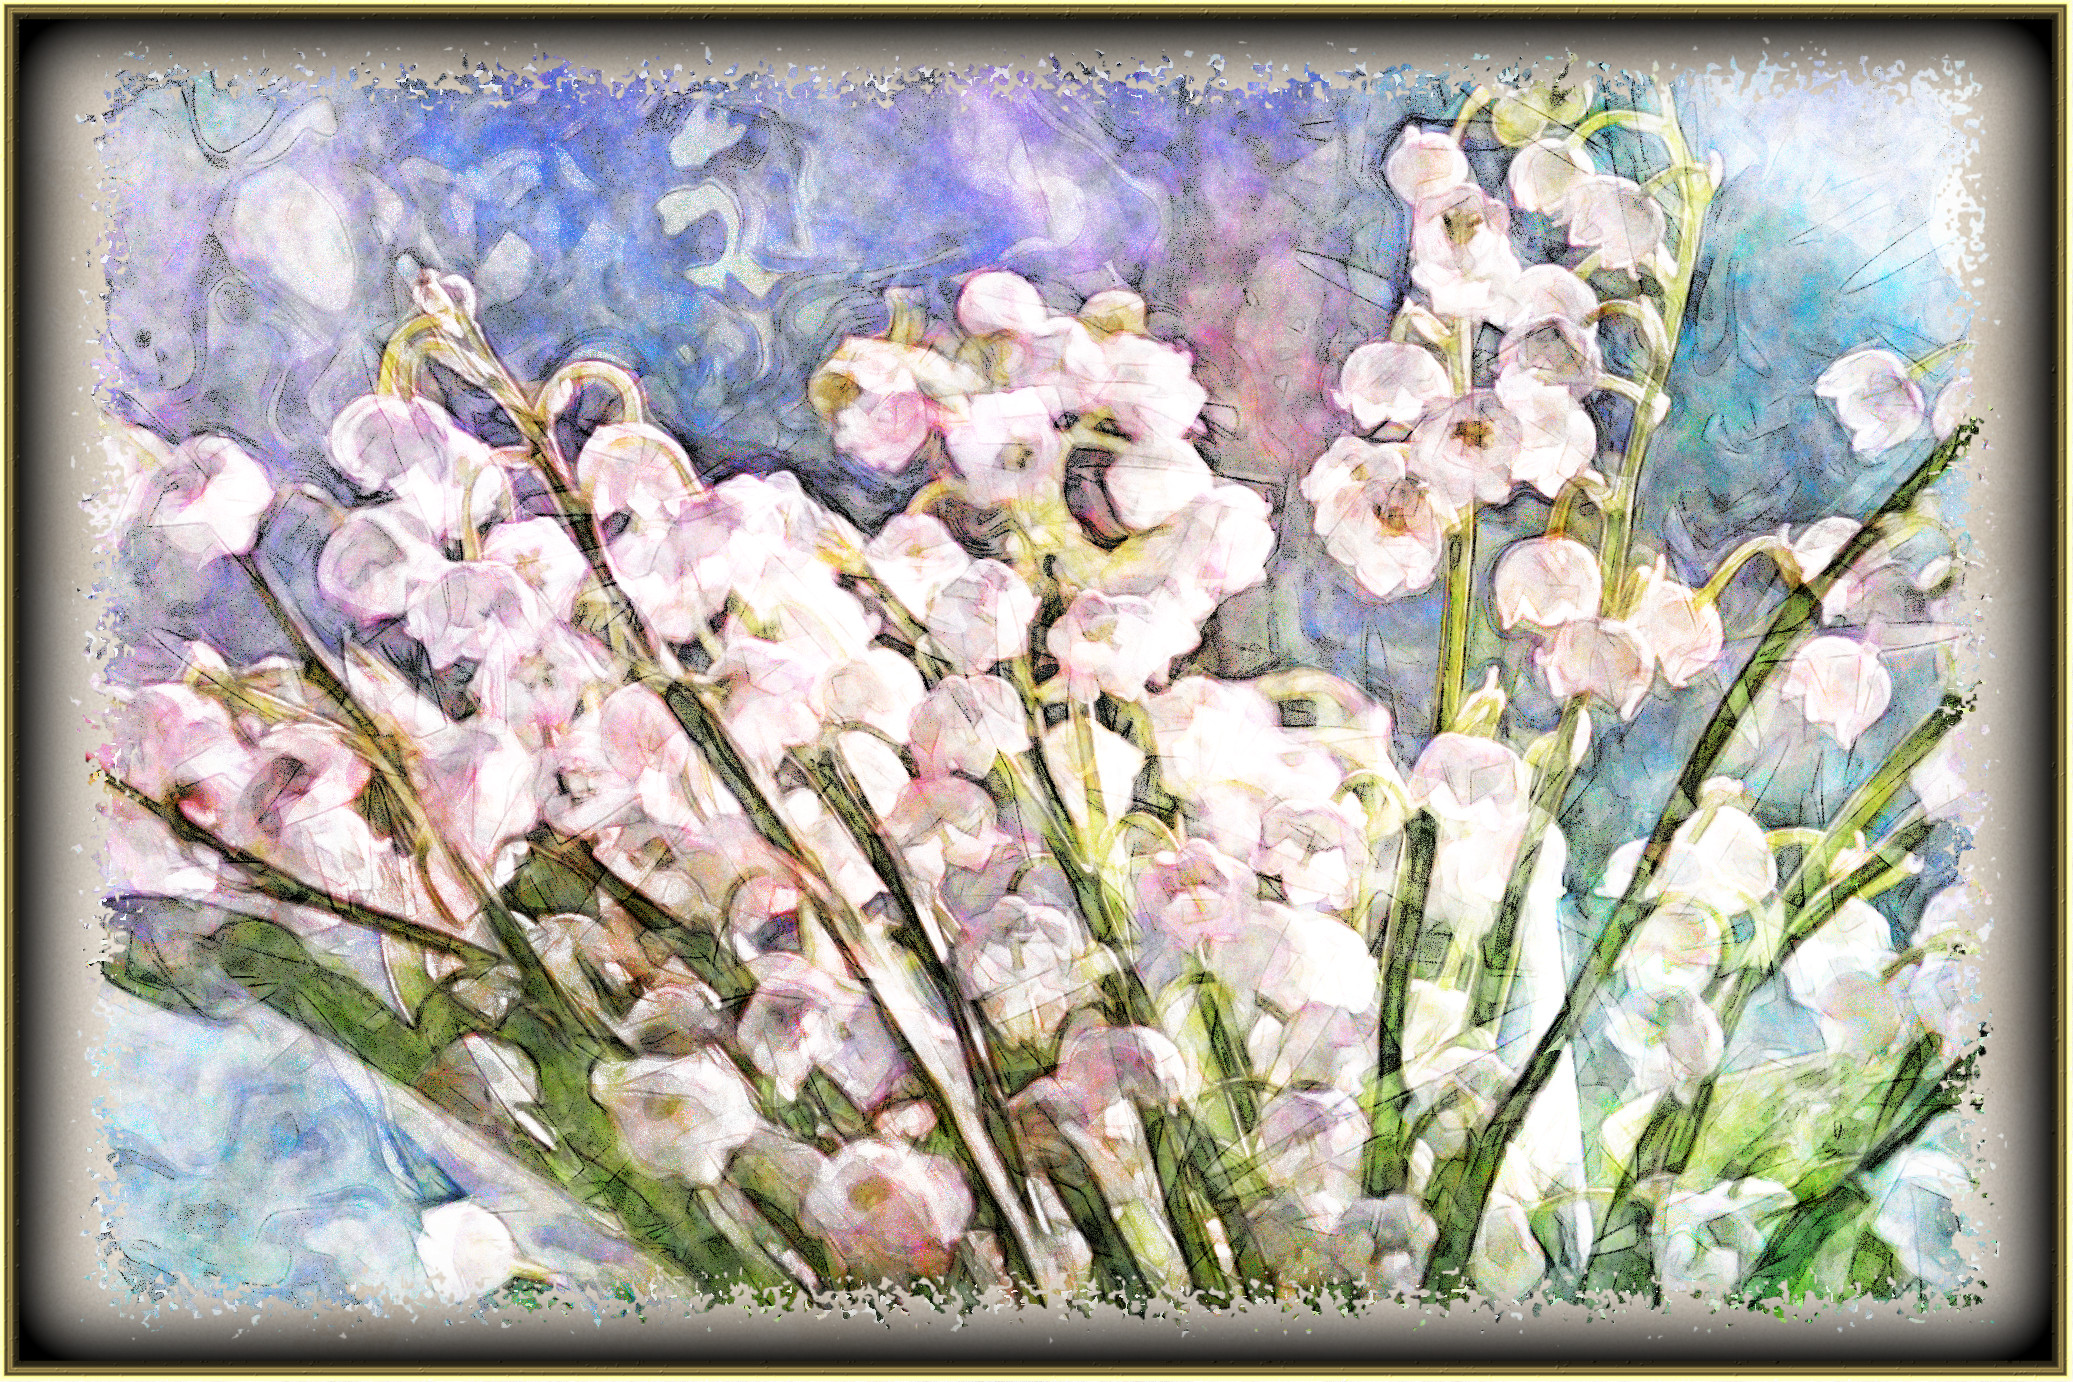 .2024-01-12 18-32-29 lilies-of-the-valley-4240129_1920 with a WaterSketch Effect 2024 (100.0,16.0,100.0,5.0,8.0,-1.0,True,1).jpg